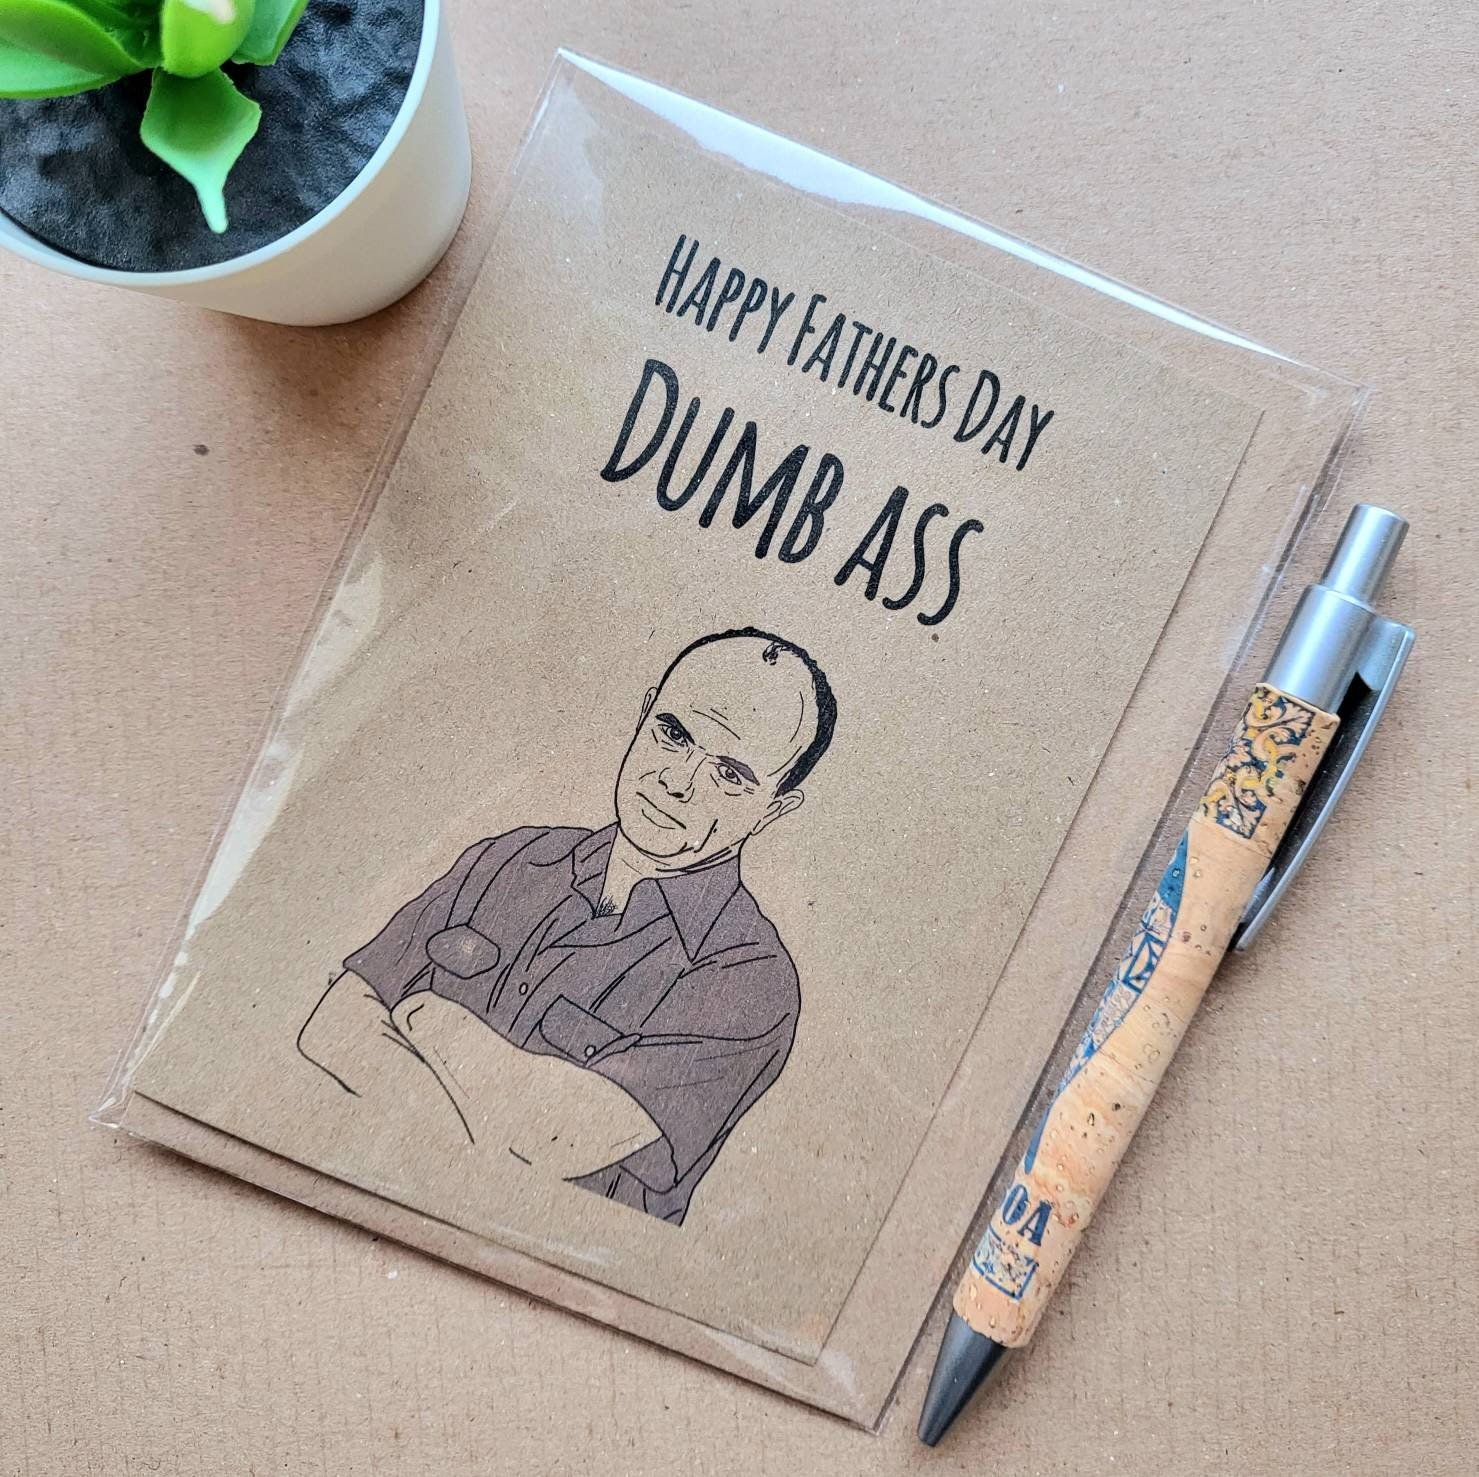 Funny that 70s show Fathers Day Card - dumb ass